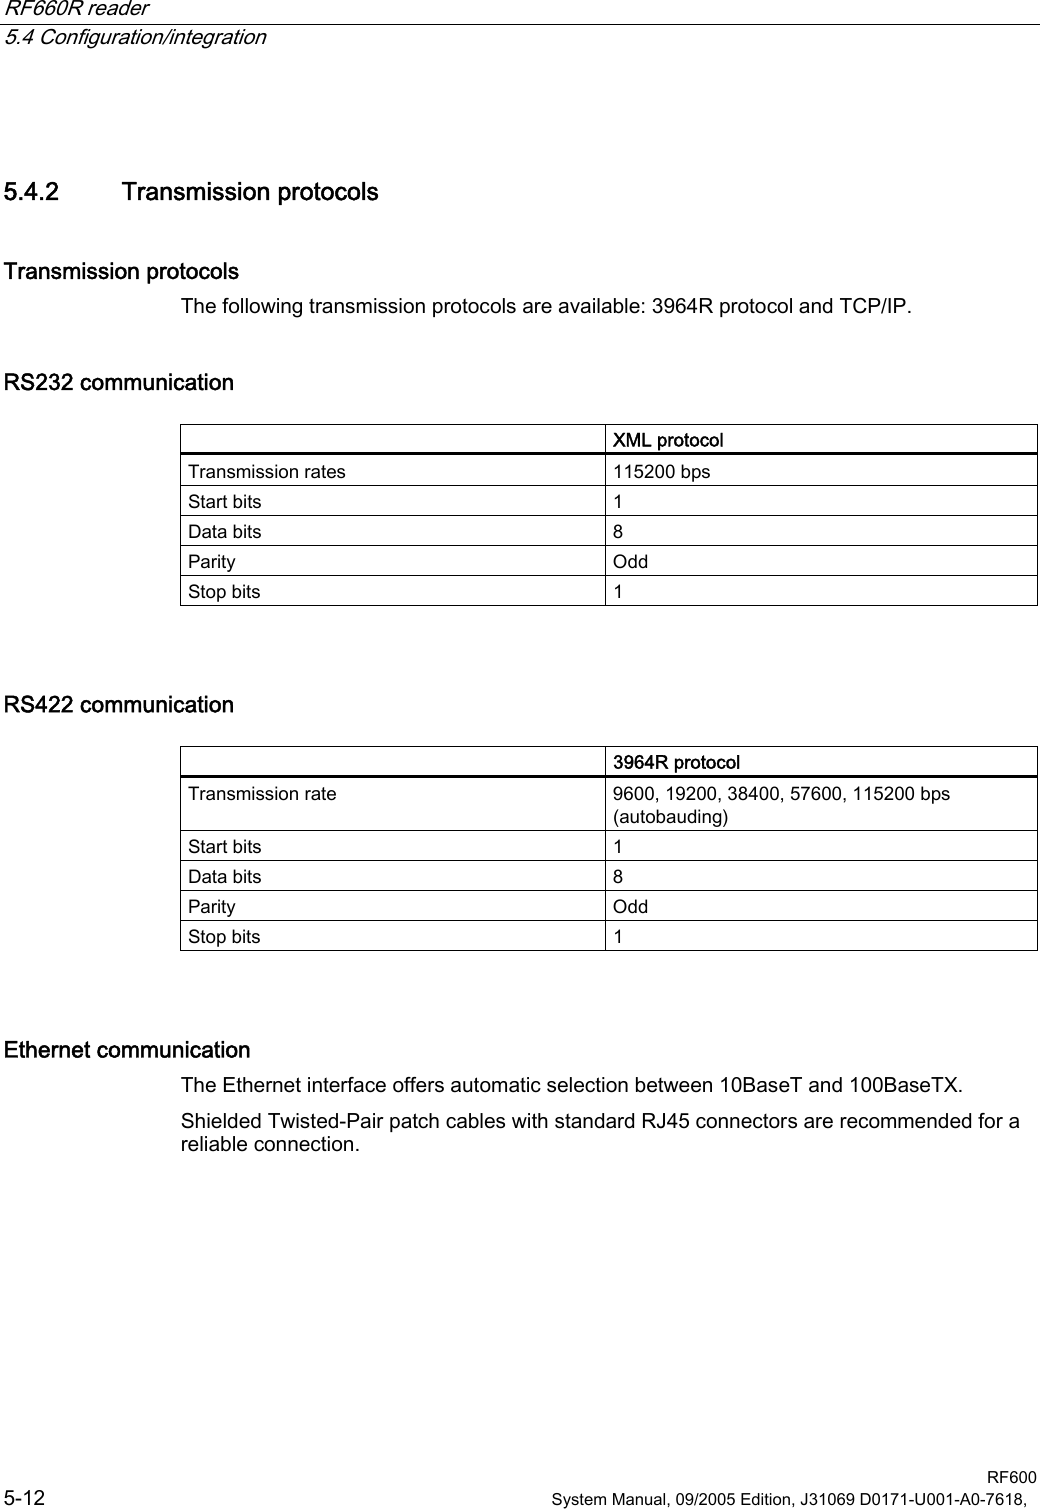 RF660R reader   5.4 Configuration/integration  RF600 5-12  System Manual, 09/2005 Edition, J31069 D0171-U001-A0-7618,   5.4.2 Transmission protocols Transmission protocols The following transmission protocols are available: 3964R protocol and TCP/IP.  RS232 communication   XML protocol Transmission rates  115200 bps Start bits  1 Data bits  8 Parity  Odd Stop bits  1  RS422 communication    3964R protocol Transmission rate  9600, 19200, 38400, 57600, 115200 bps (autobauding) Start bits  1 Data bits  8 Parity  Odd Stop bits  1  Ethernet communication The Ethernet interface offers automatic selection between 10BaseT and 100BaseTX. Shielded Twisted-Pair patch cables with standard RJ45 connectors are recommended for a reliable connection.  